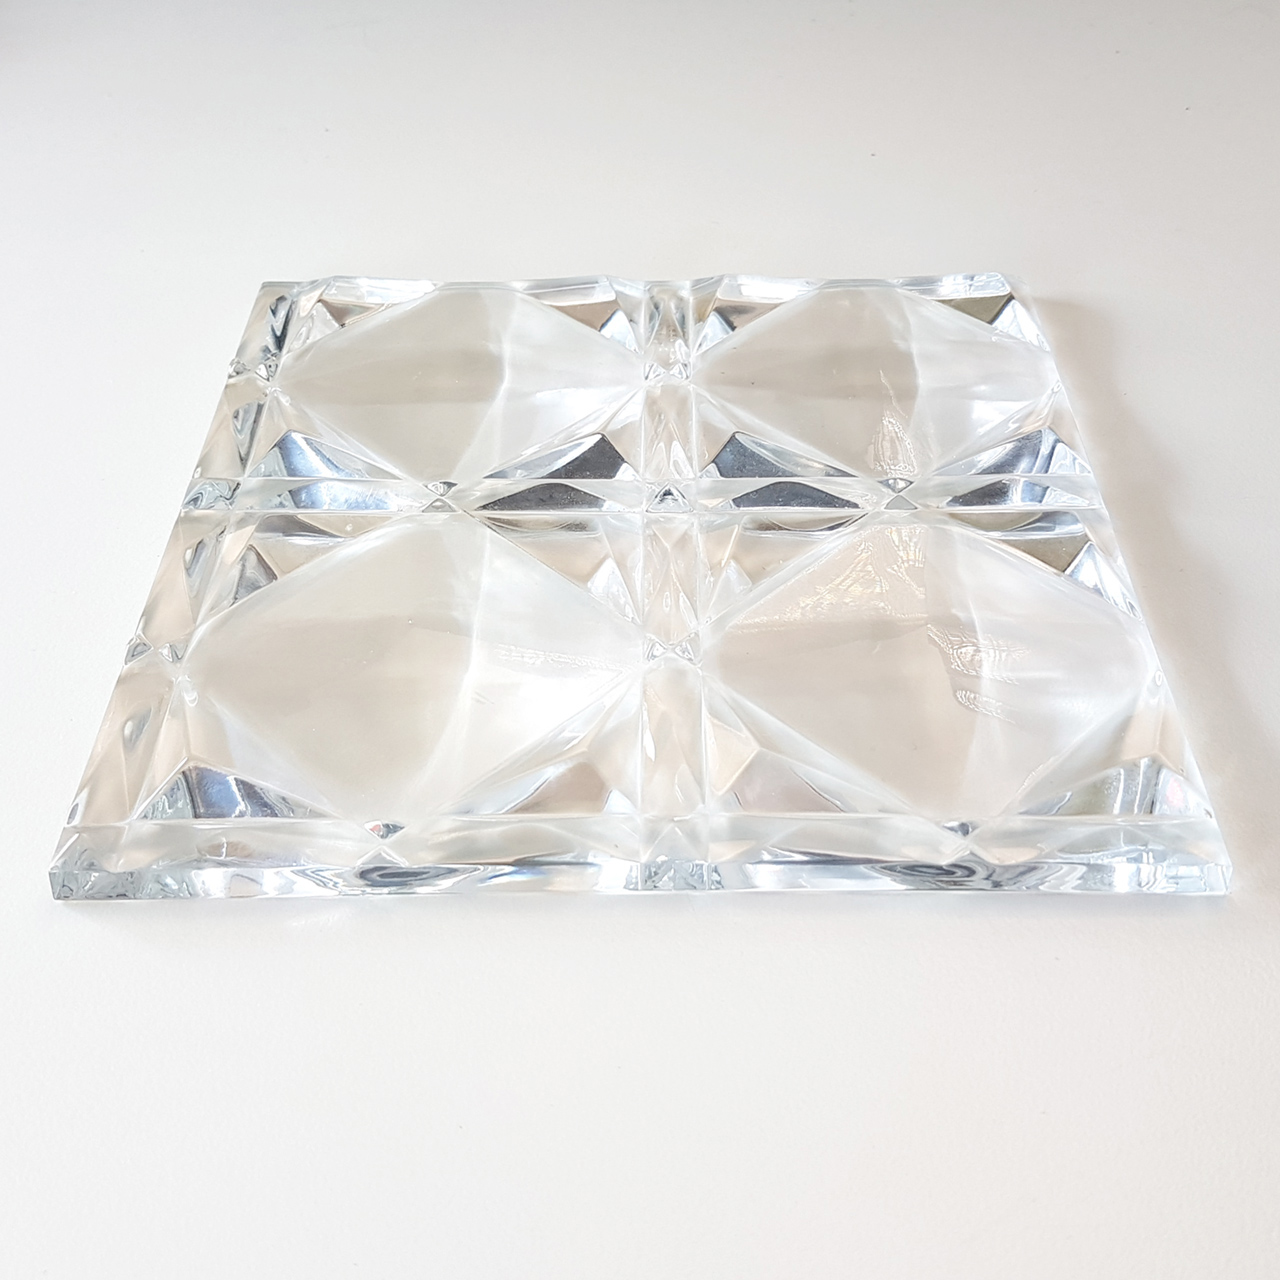 Glass tile approx. 17x17cm clear - structure with 4 squares